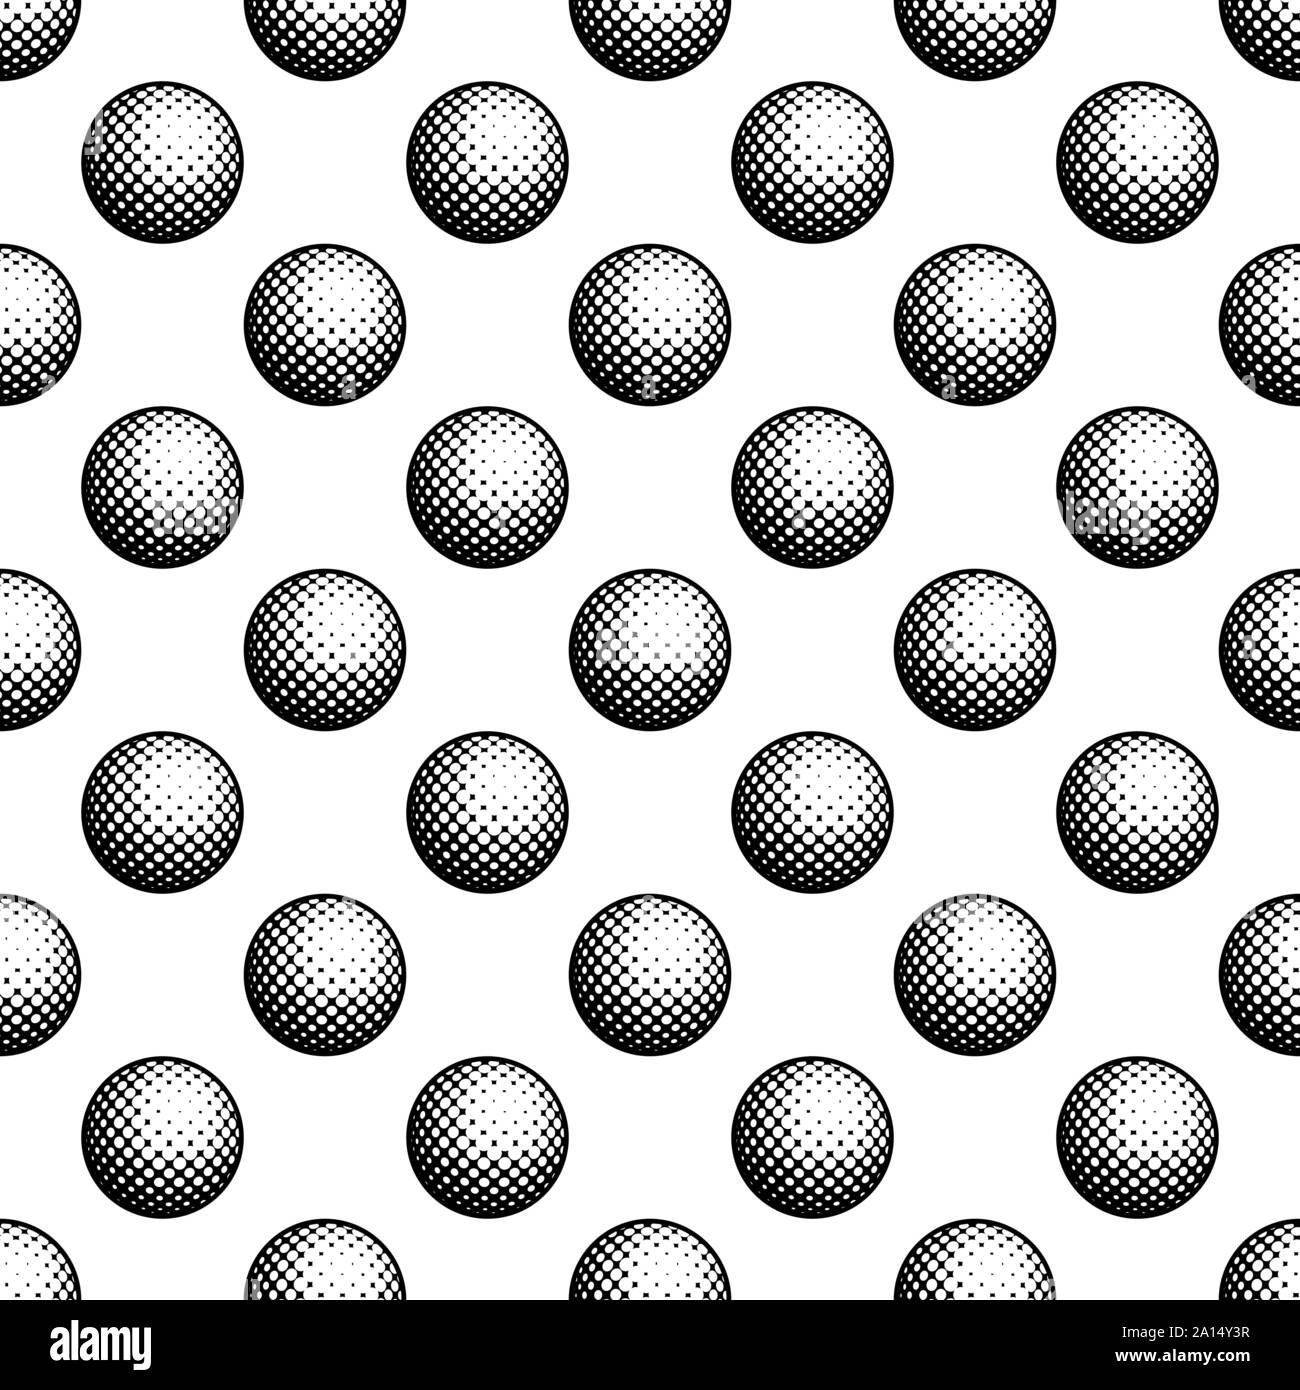 White background with black outline golf balls seamless pattern Stock Vector